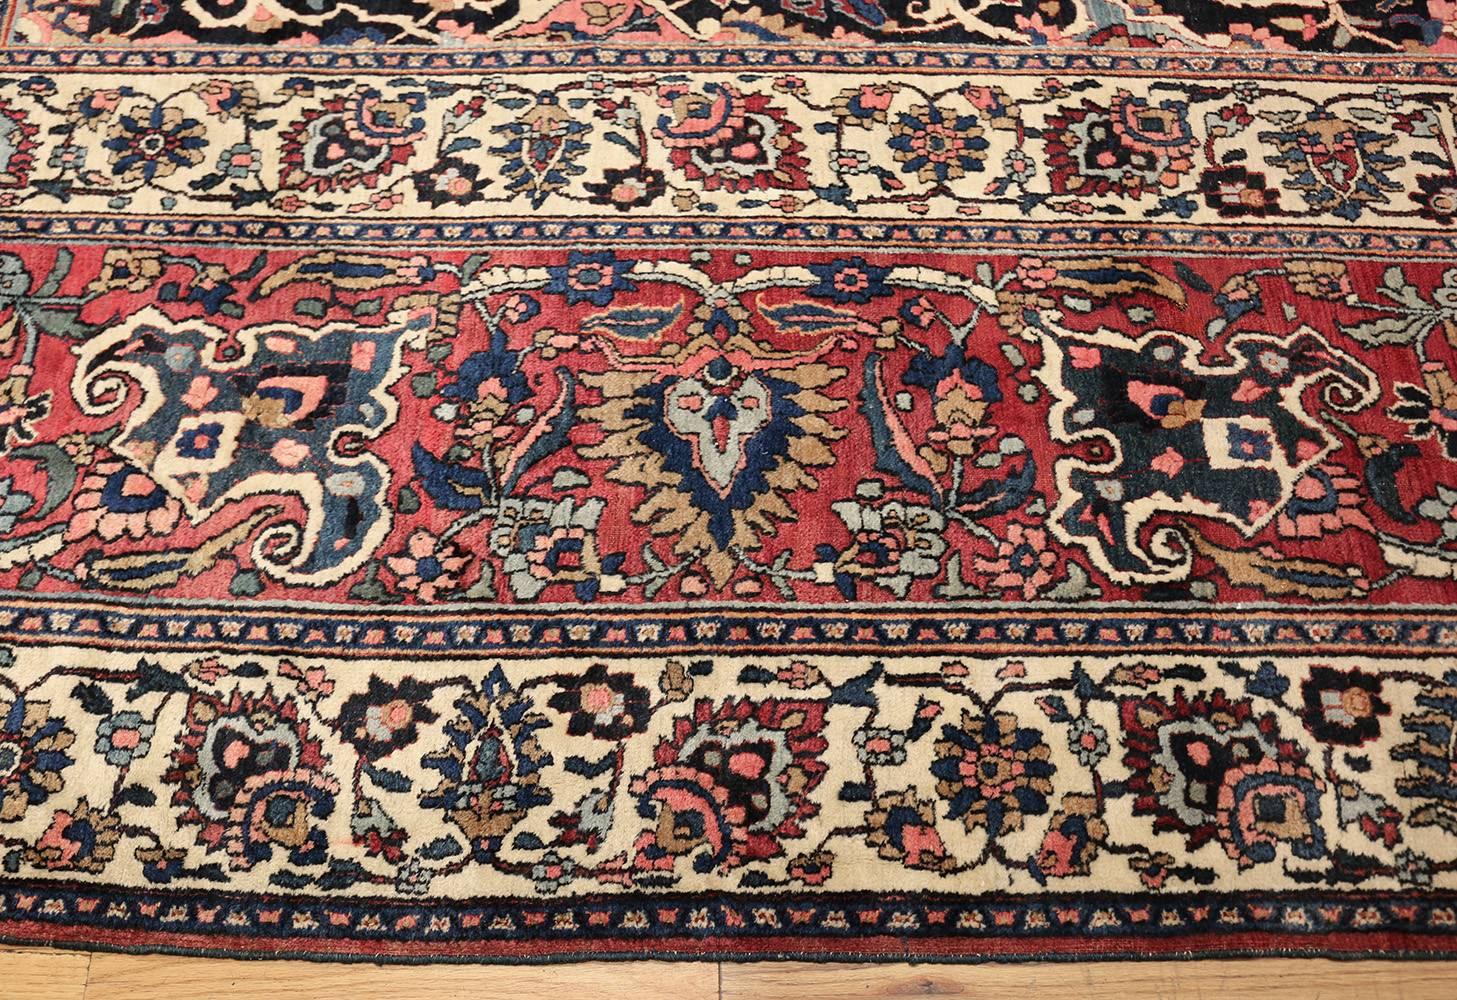 Oversized Antique Persian Khorassan Rug, Country of Origin: Persia, Circa: 1900 – Size: 15 ft 6 in x 20 ft (4.72 m x 6.1 m)

Here is an absolutely breathtaking antique Persian rug, a masterpiece that exemplifies some of the most desirable classic